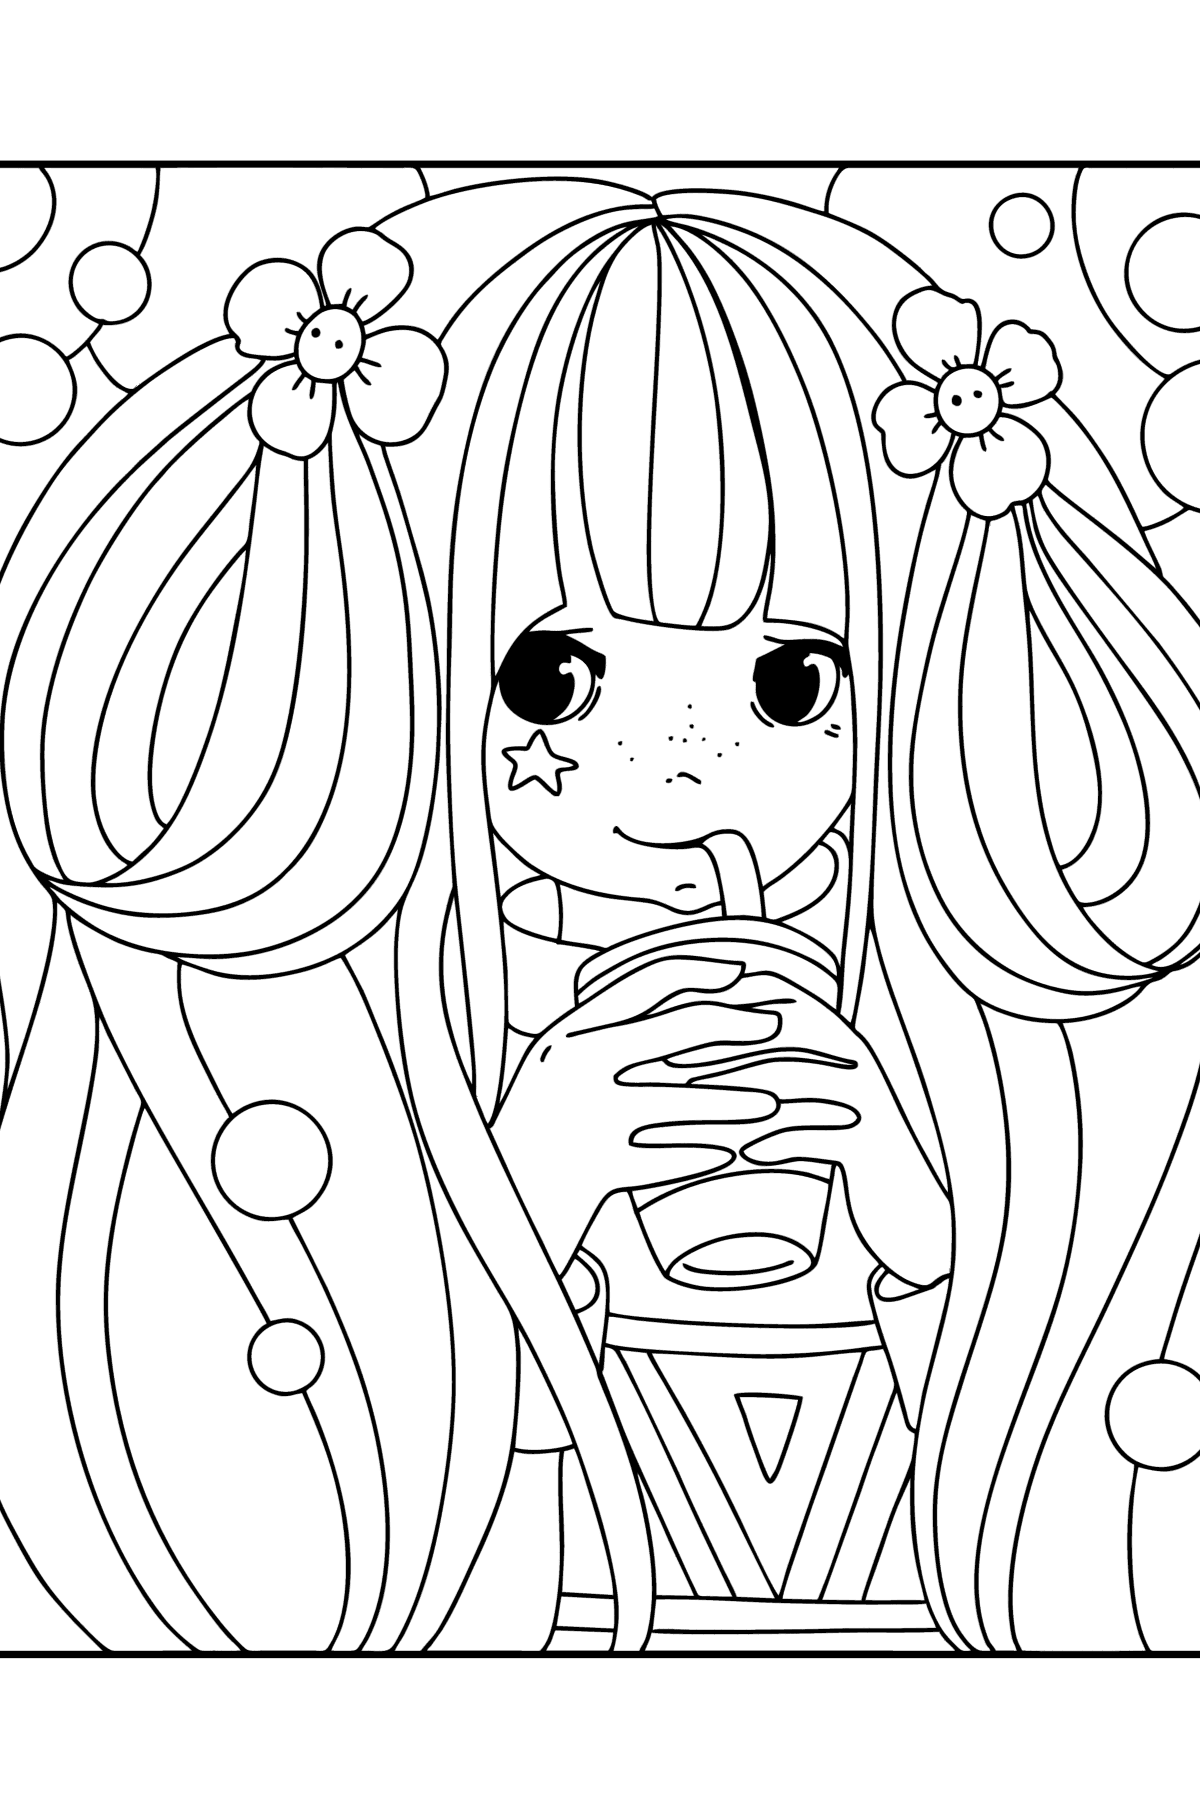 Girl anime fashionista coloring page - Coloring Pages for Kids